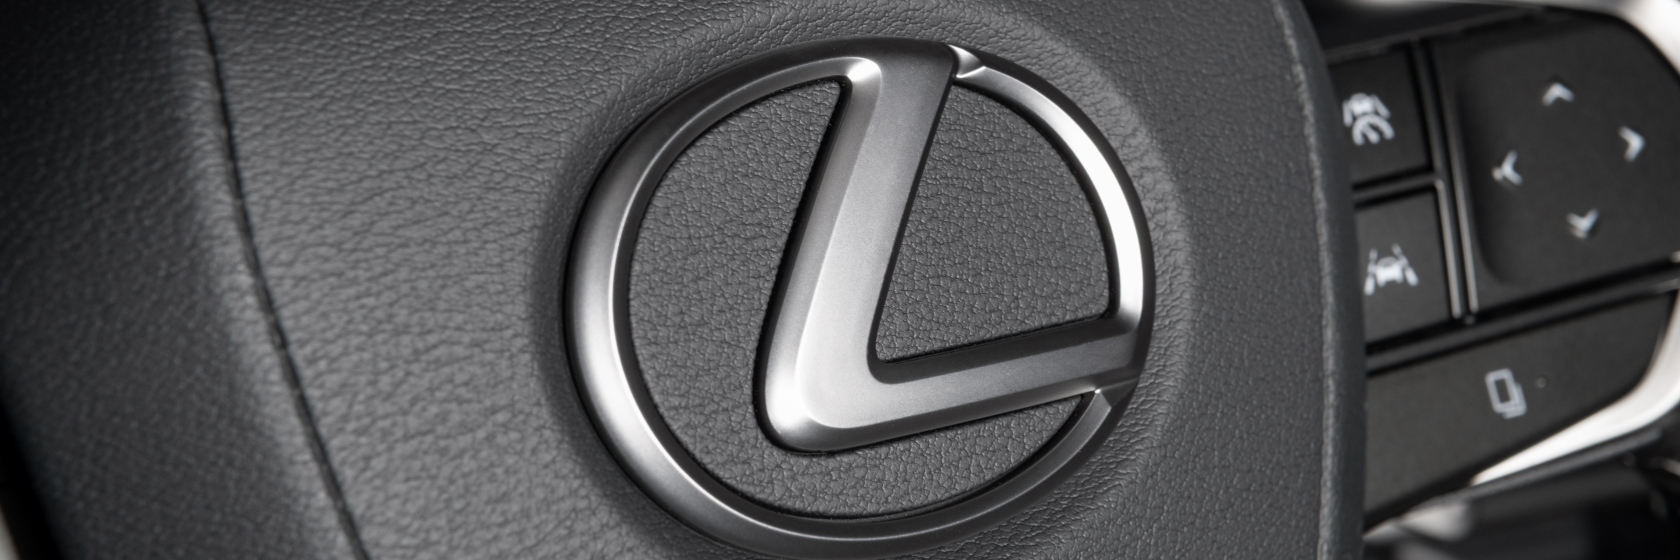 reasons-why-lexus-is-a-top-choice-for-luxury-car-buyers